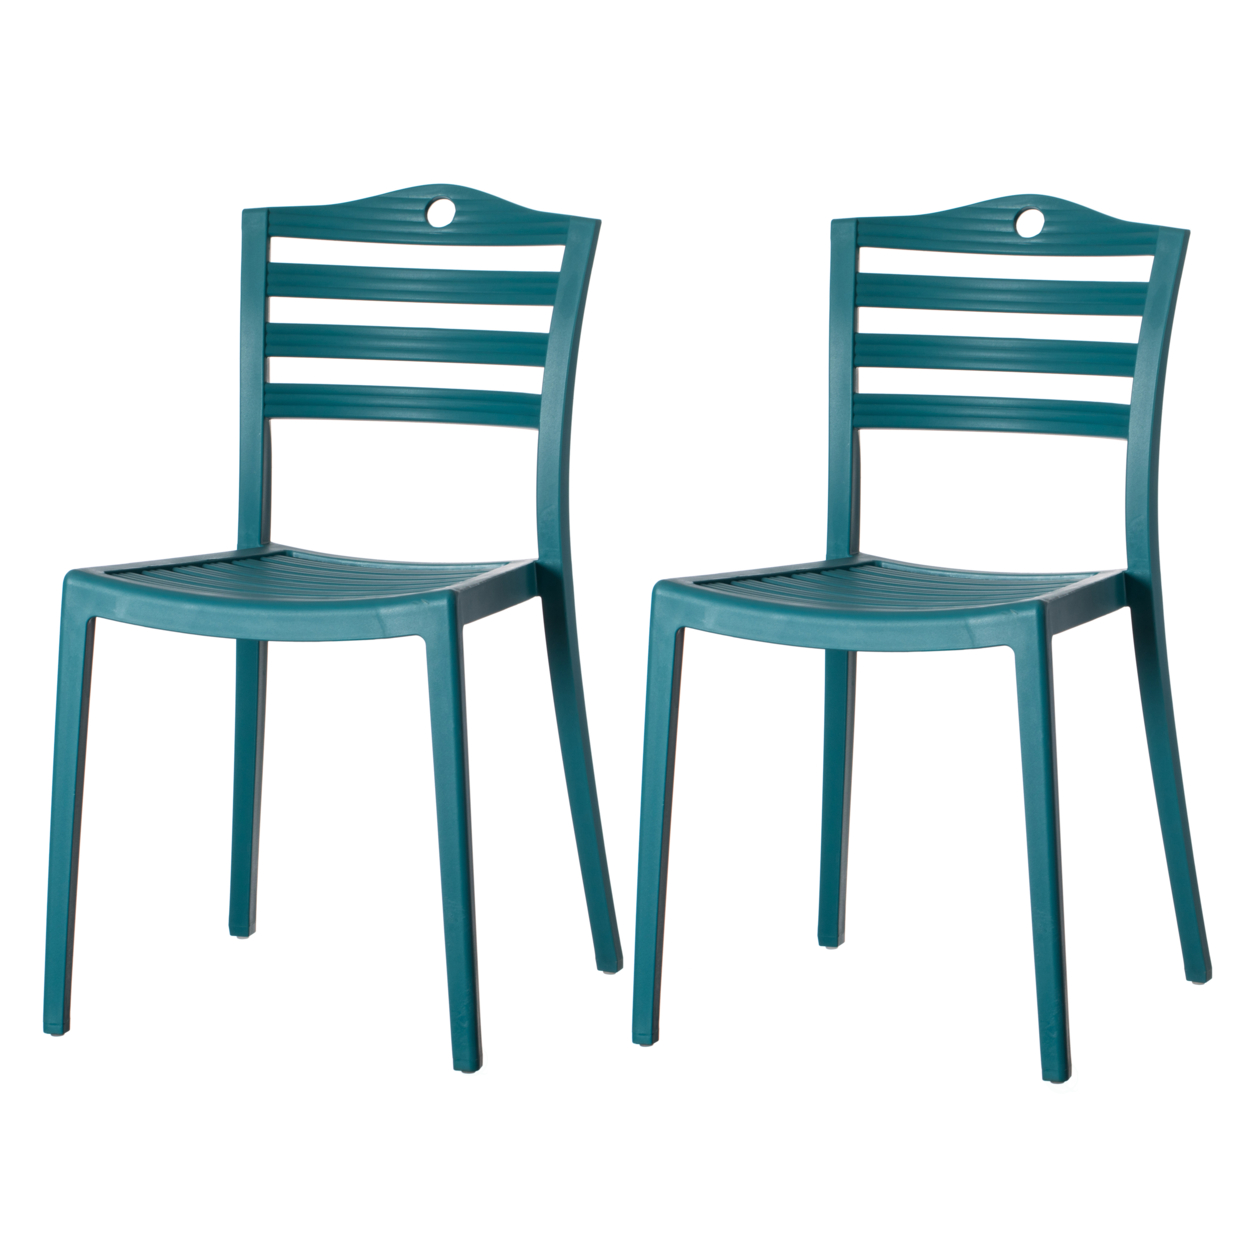 Stackable Modern Plastic Indoor And Outdoor Dining Chair With Ladderback Design For All Weather Use - Set Of 2 Blue